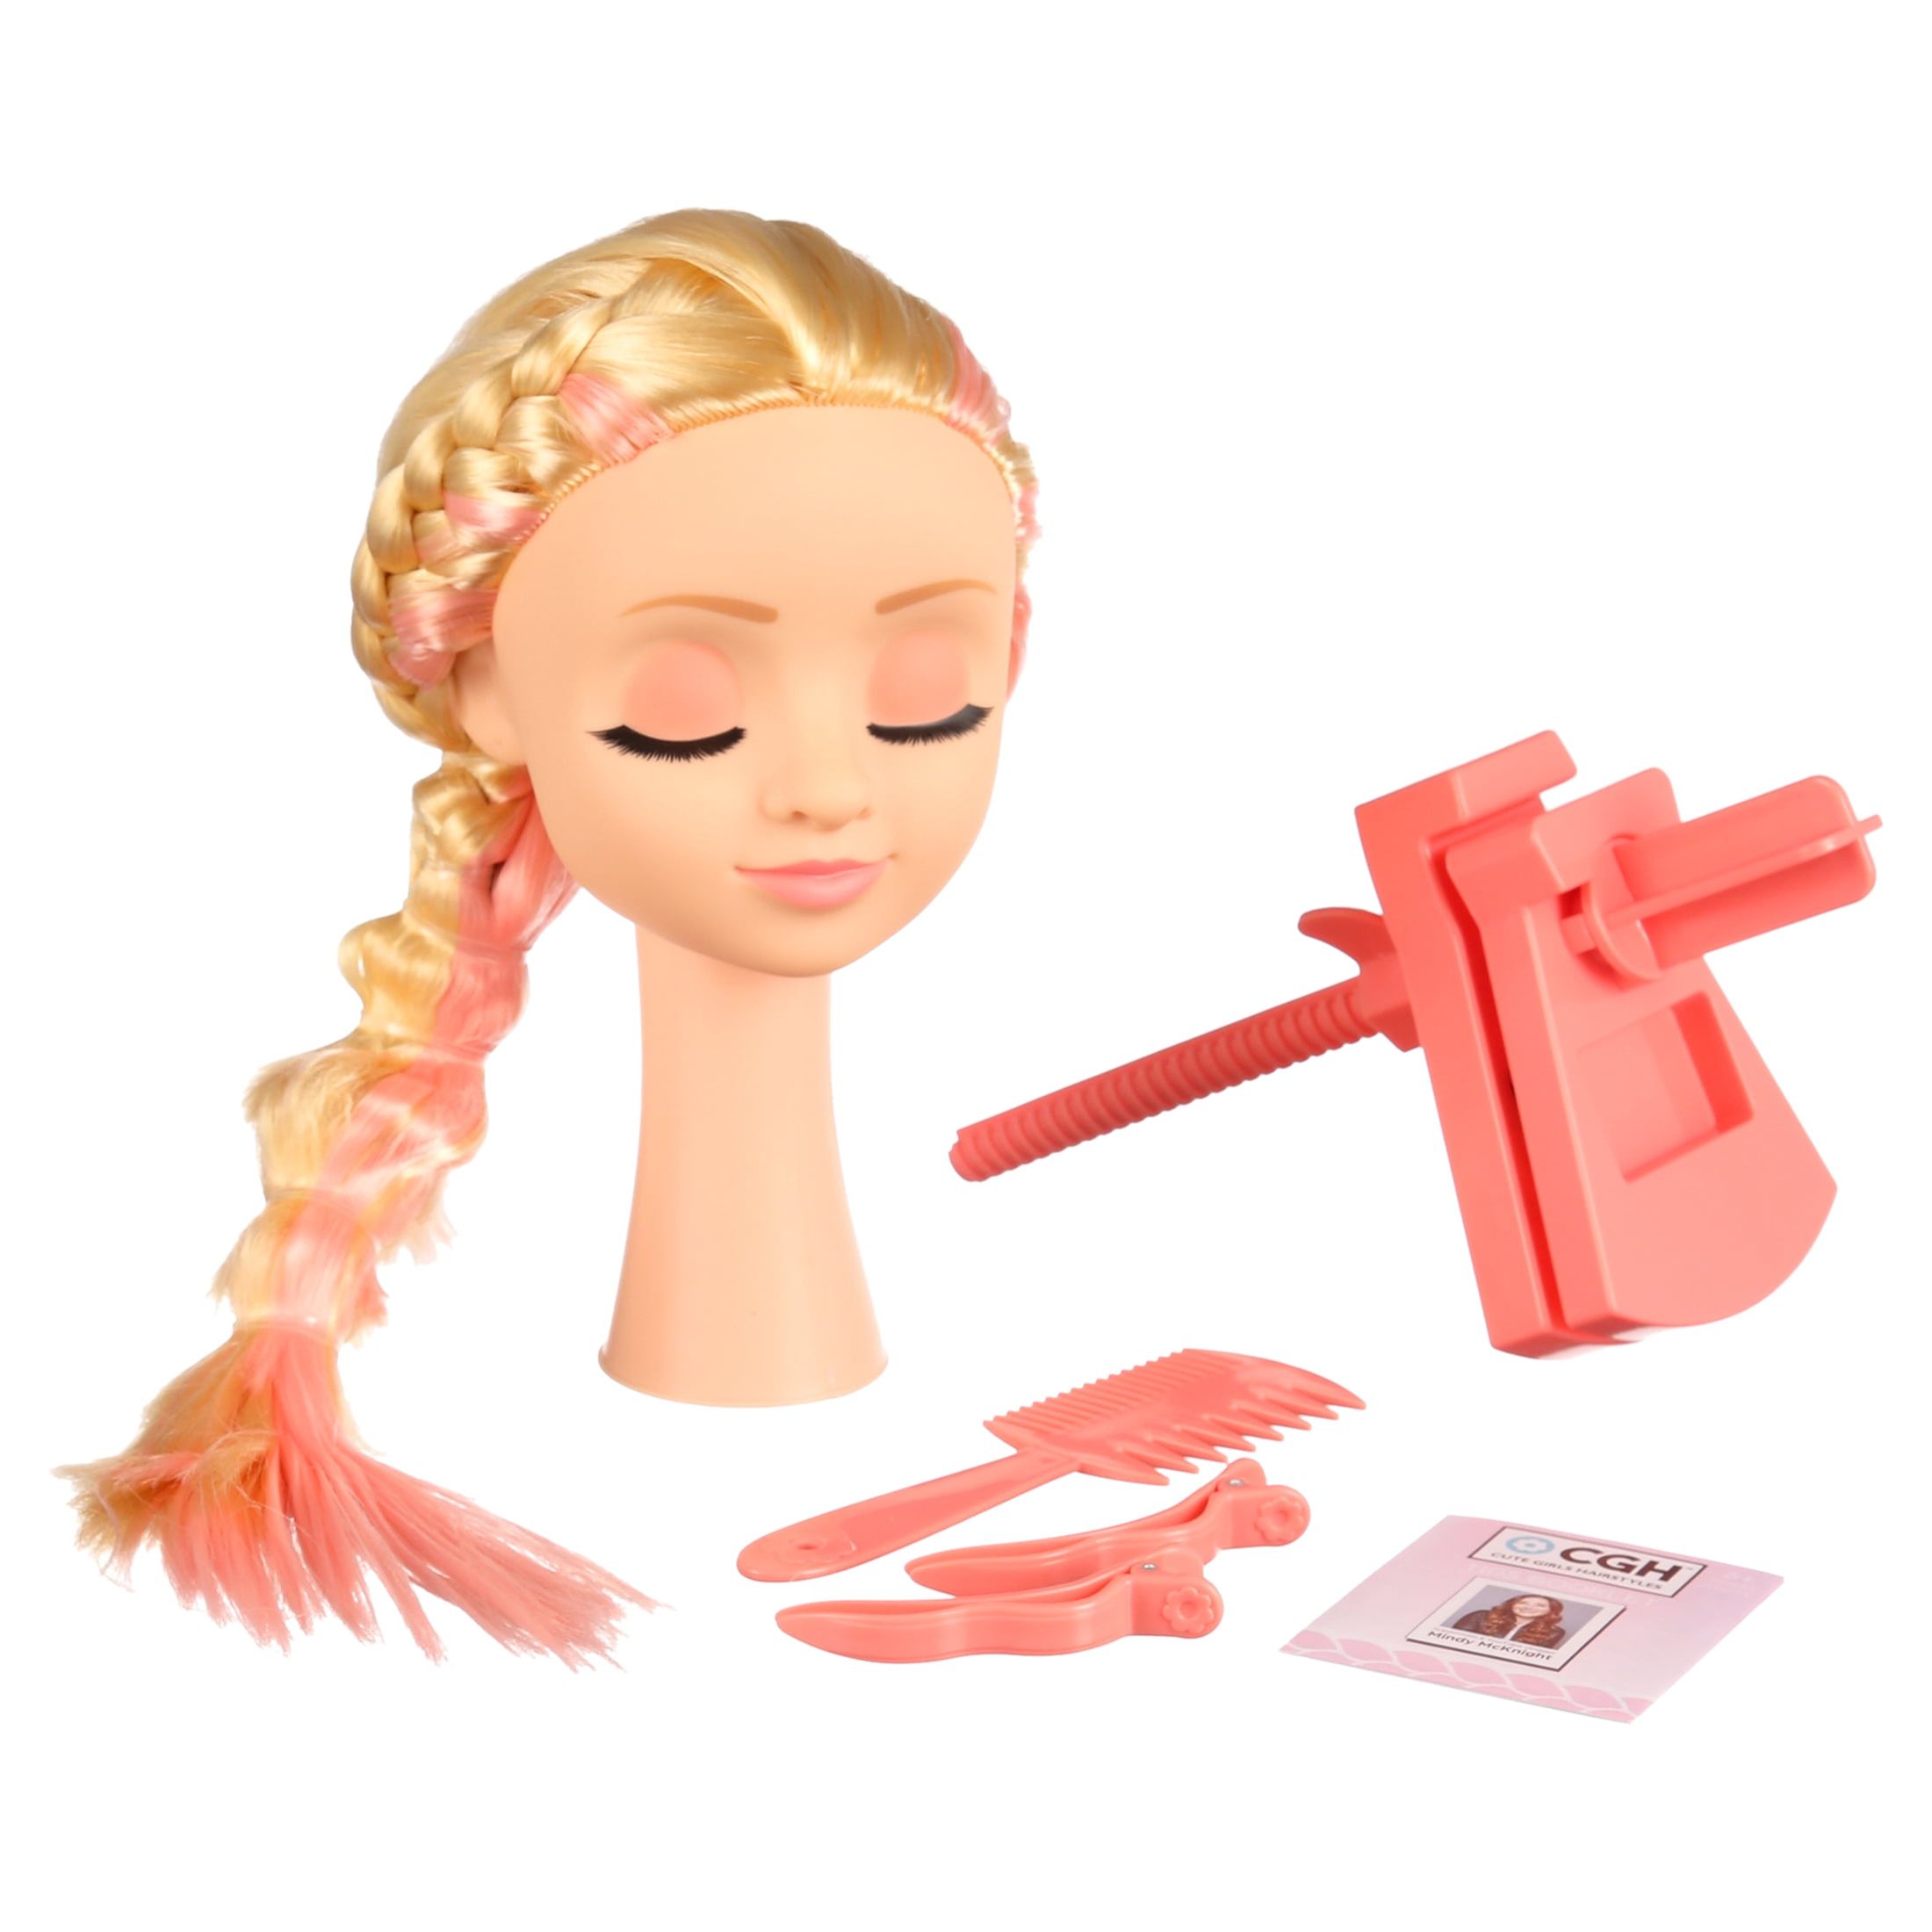 Cute Girls Hairstyles Styling Head Doll Playset, 20 Pieces - image 1 of 8